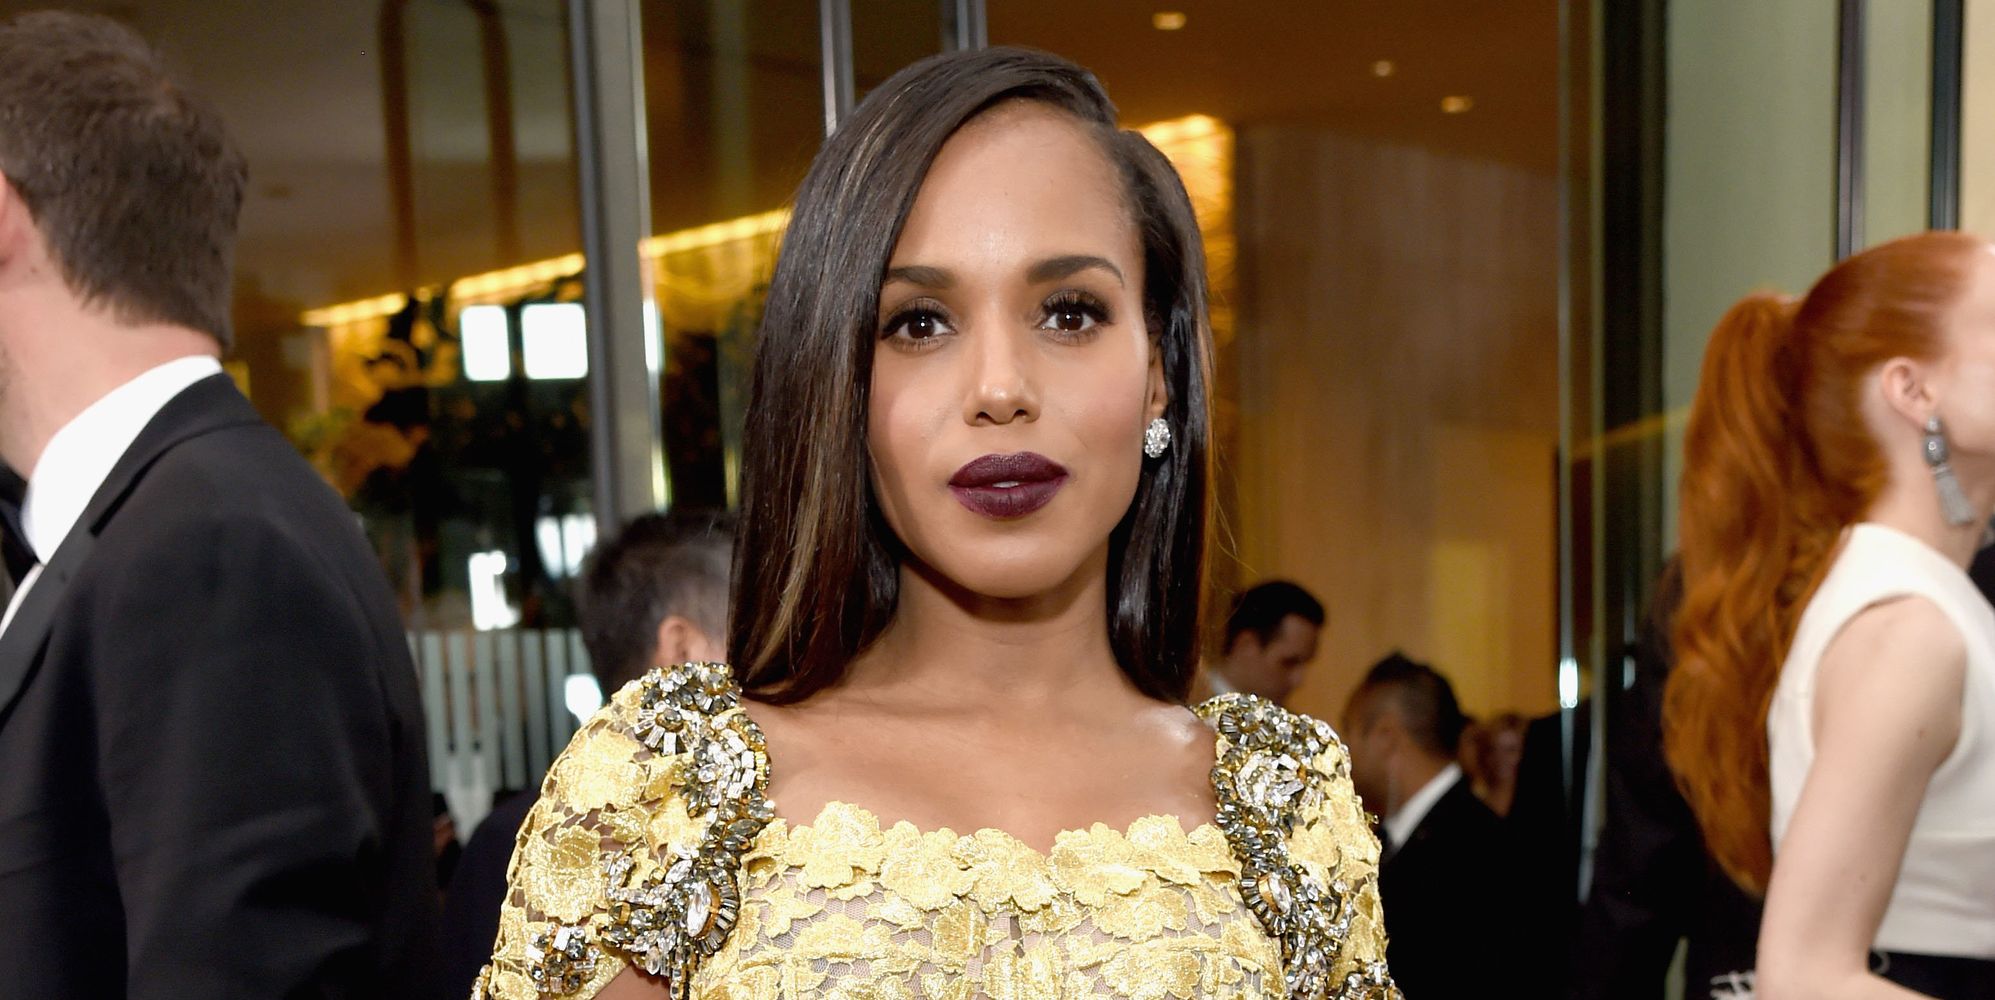 Kerry Washington's Best Role? Being A 'Well-Rested Woman' With Two Kids - Huffington Post